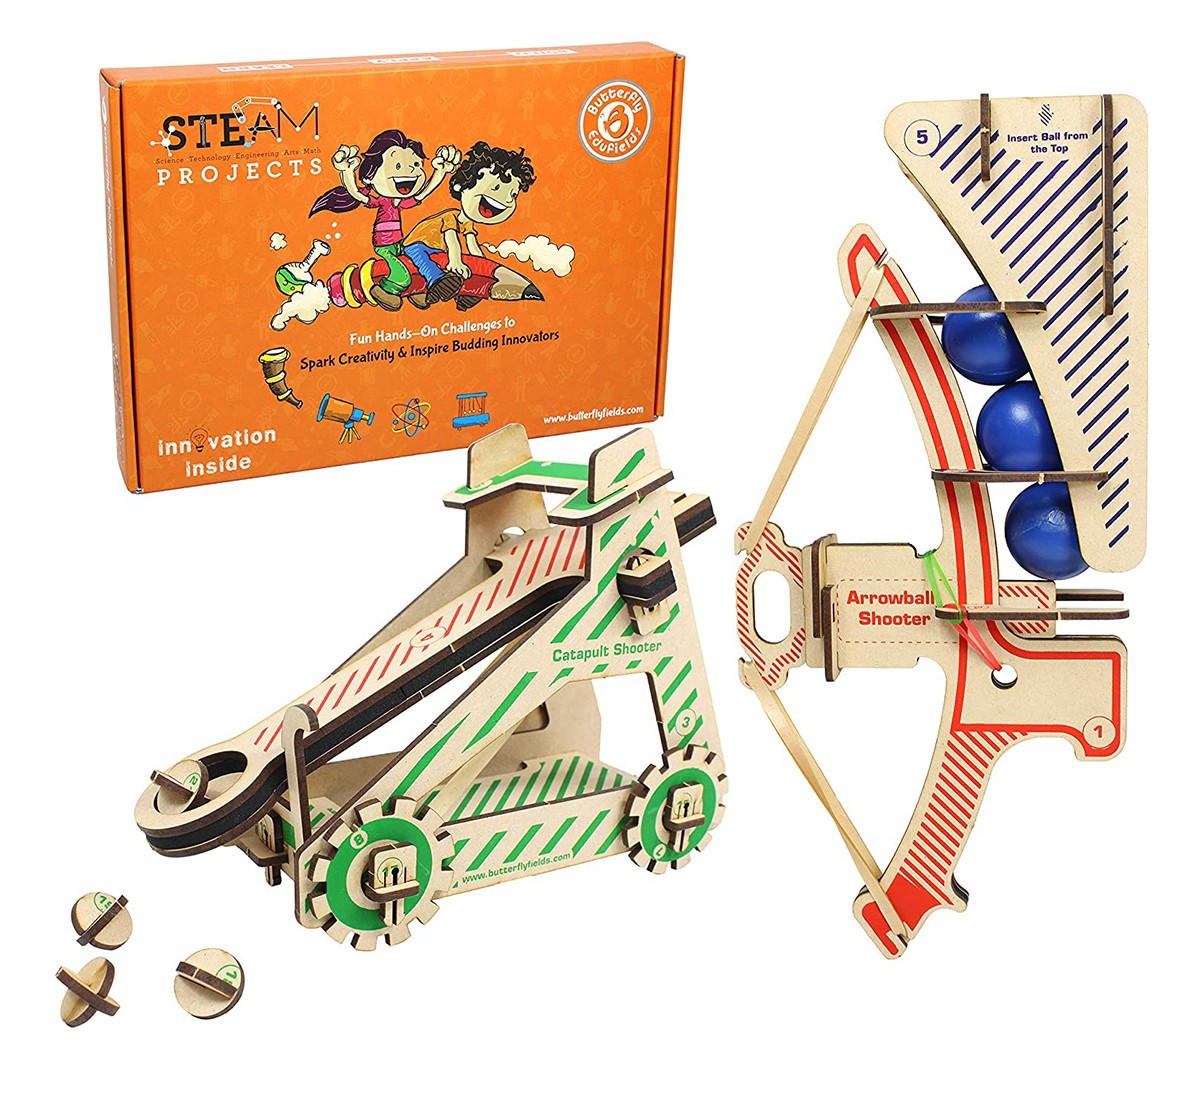 Butterfly Edufields Wooden Catapult Shooter vs Arrowball Shooter, 5Y+